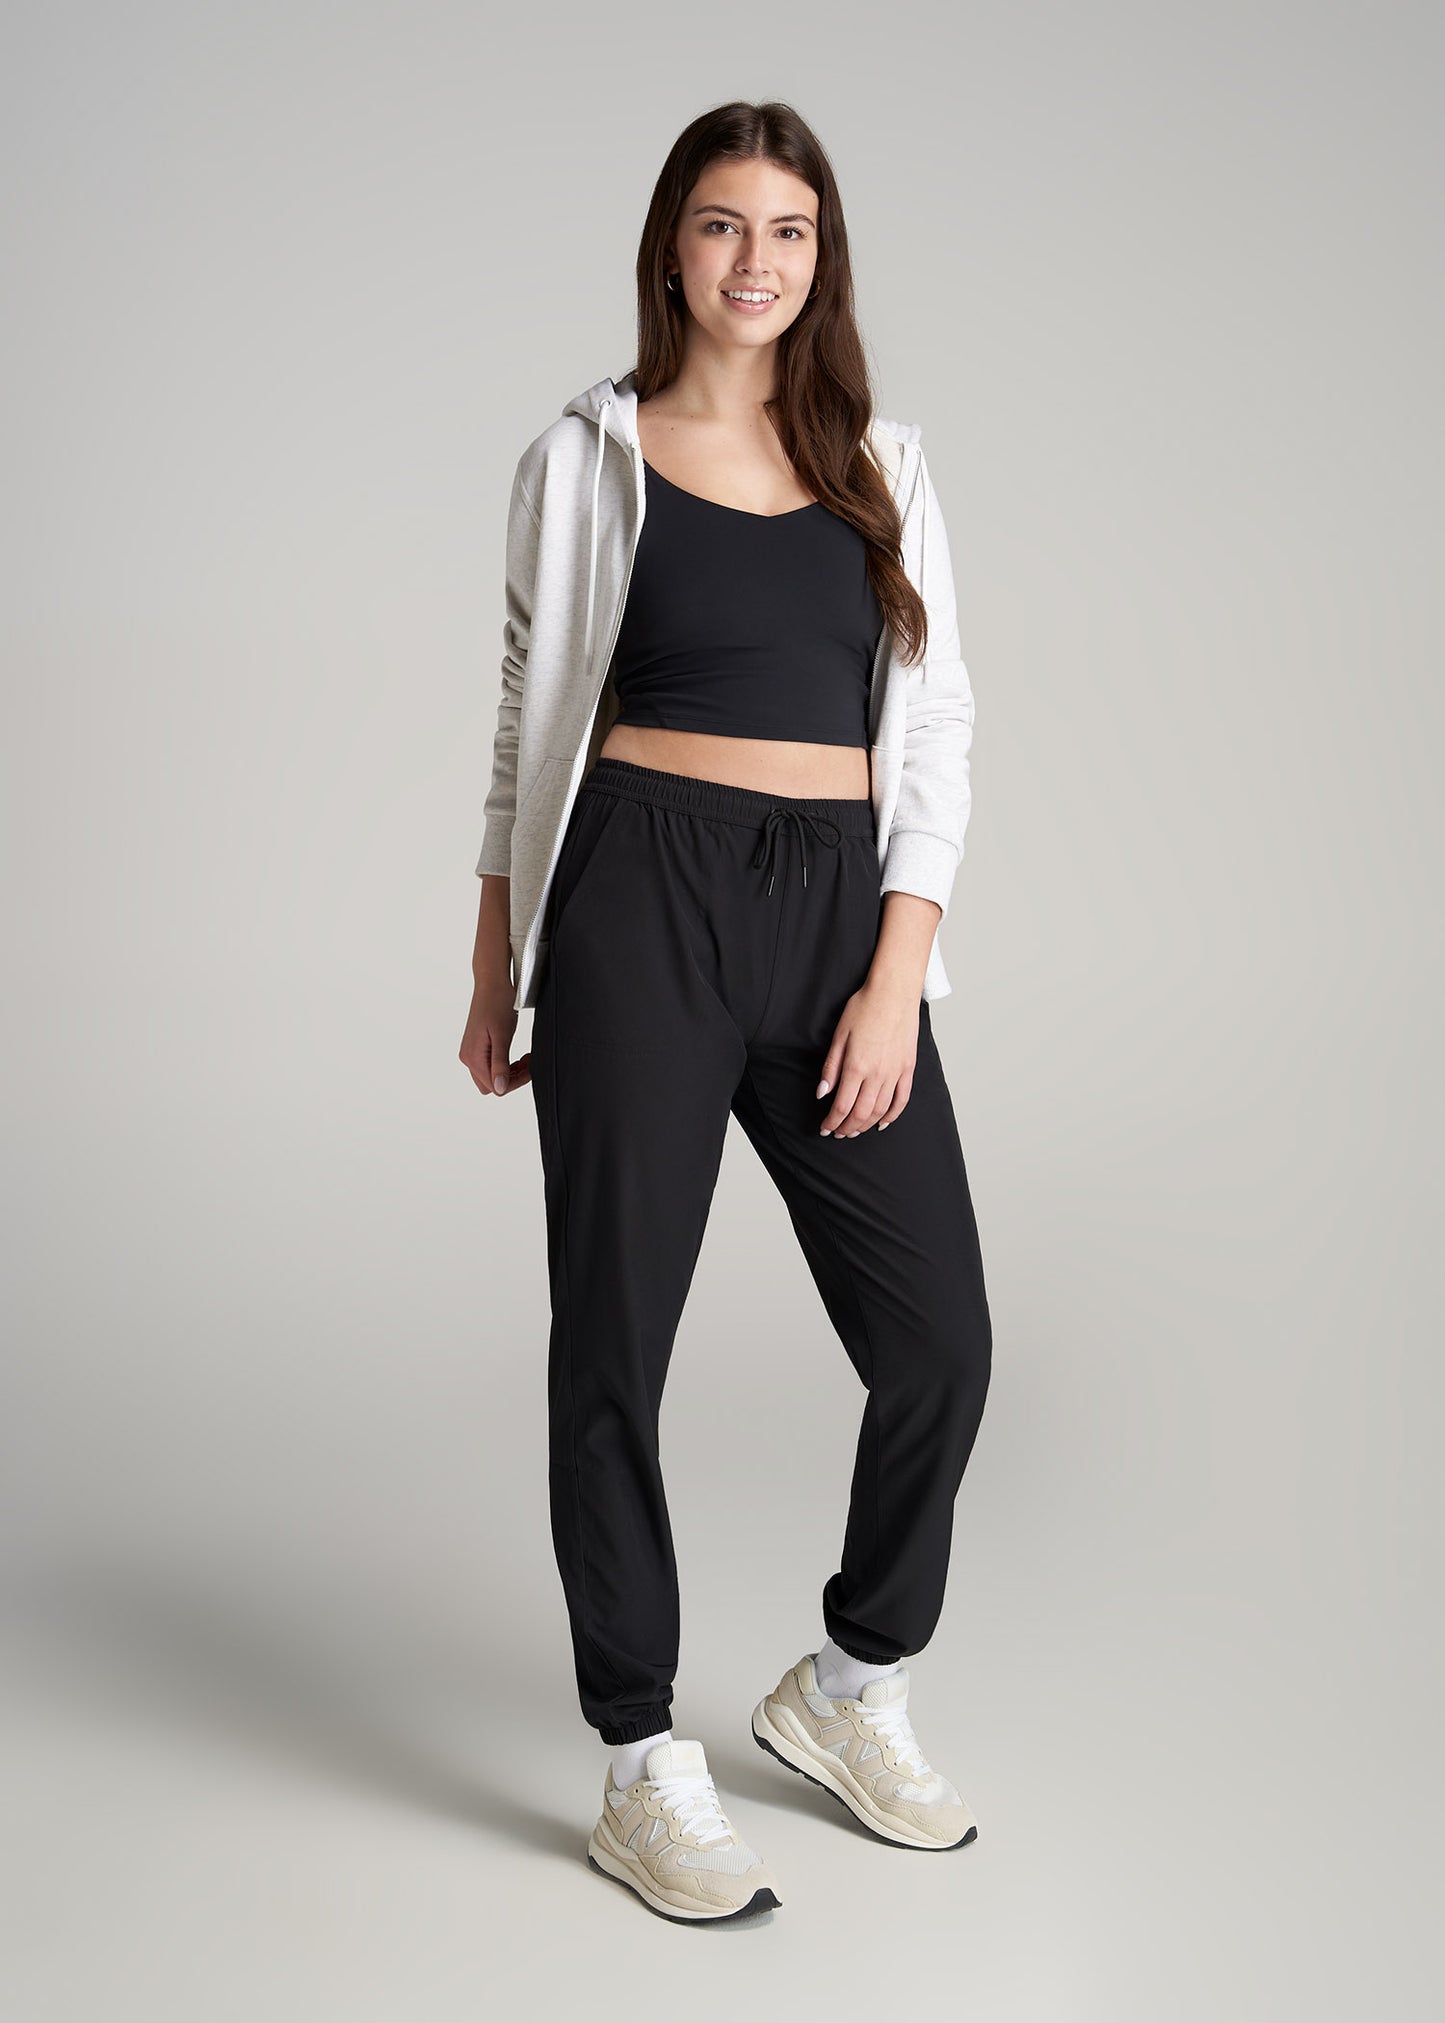 Joggers For Tall Women: Balance Collection Jogger Black – American